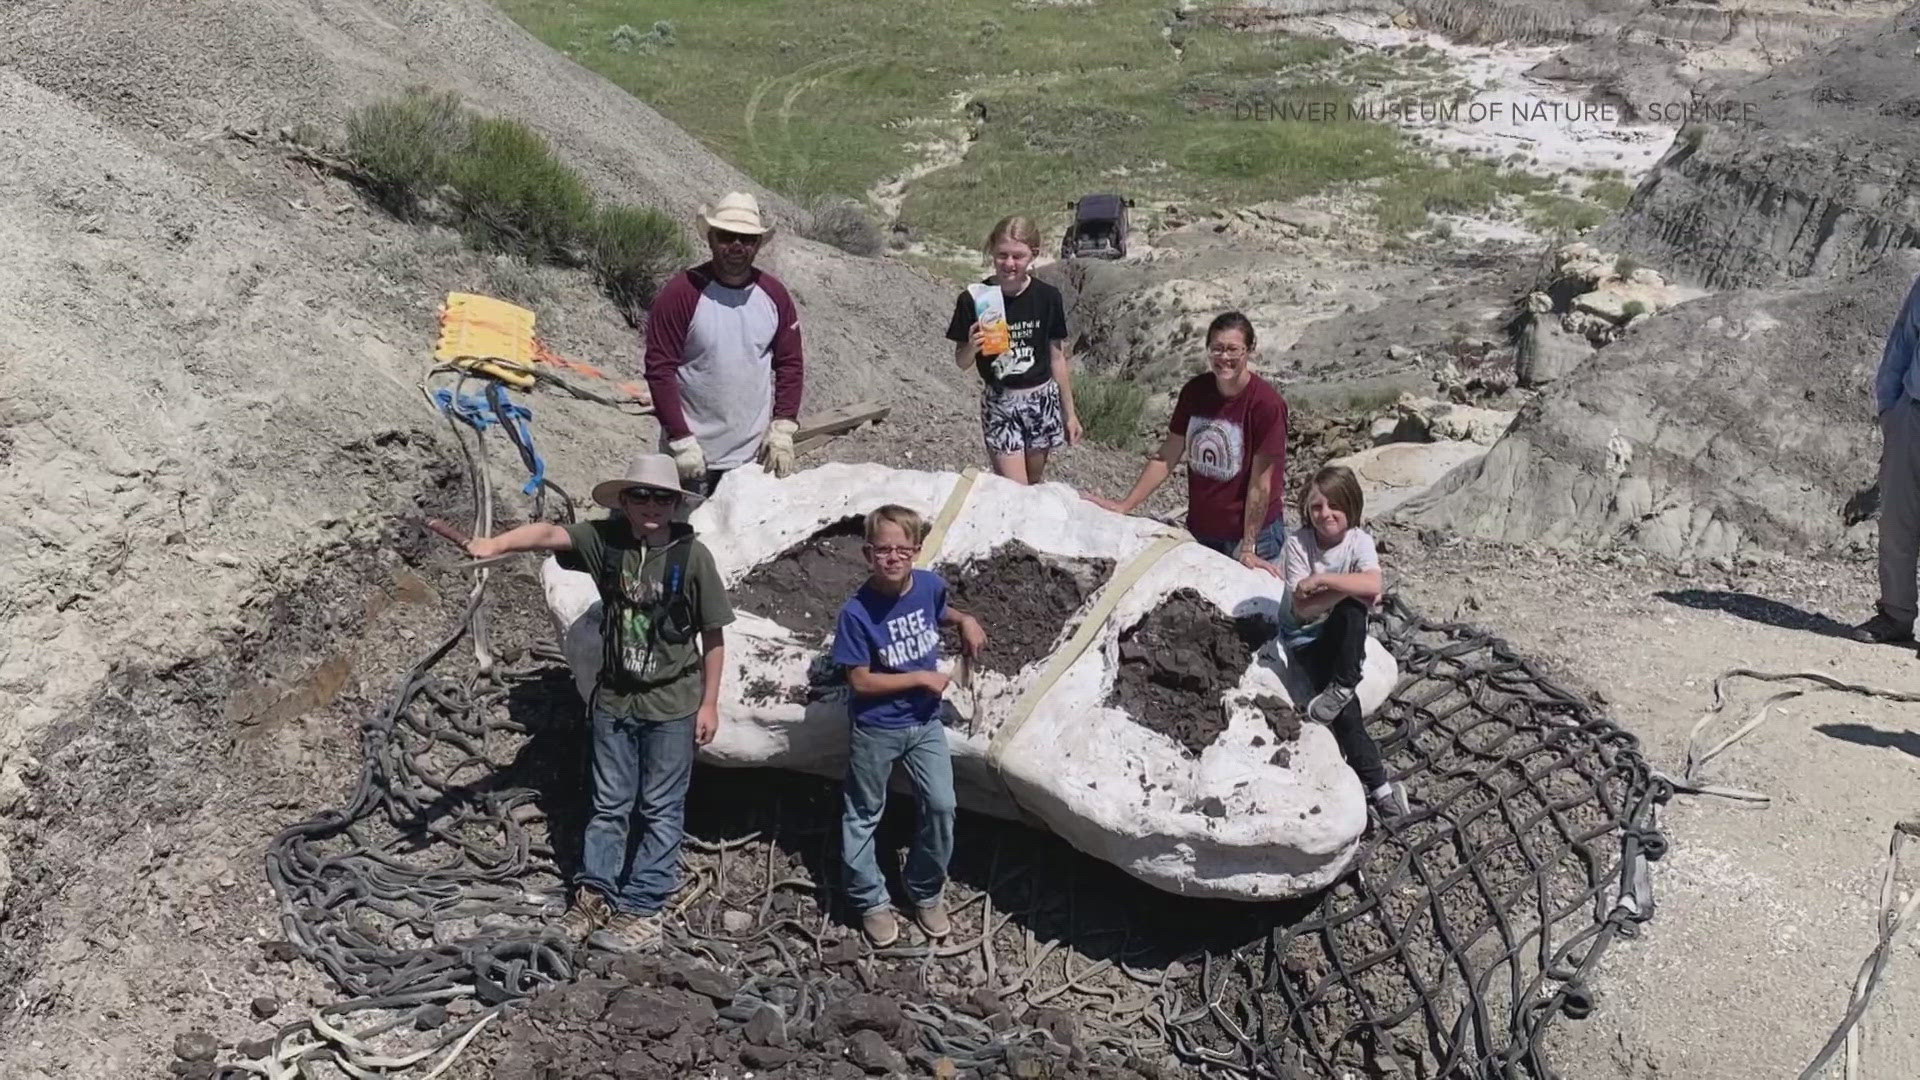 Only a handful of juvenile Tyrannosaurus rex skeletons have ever been found worldwide.